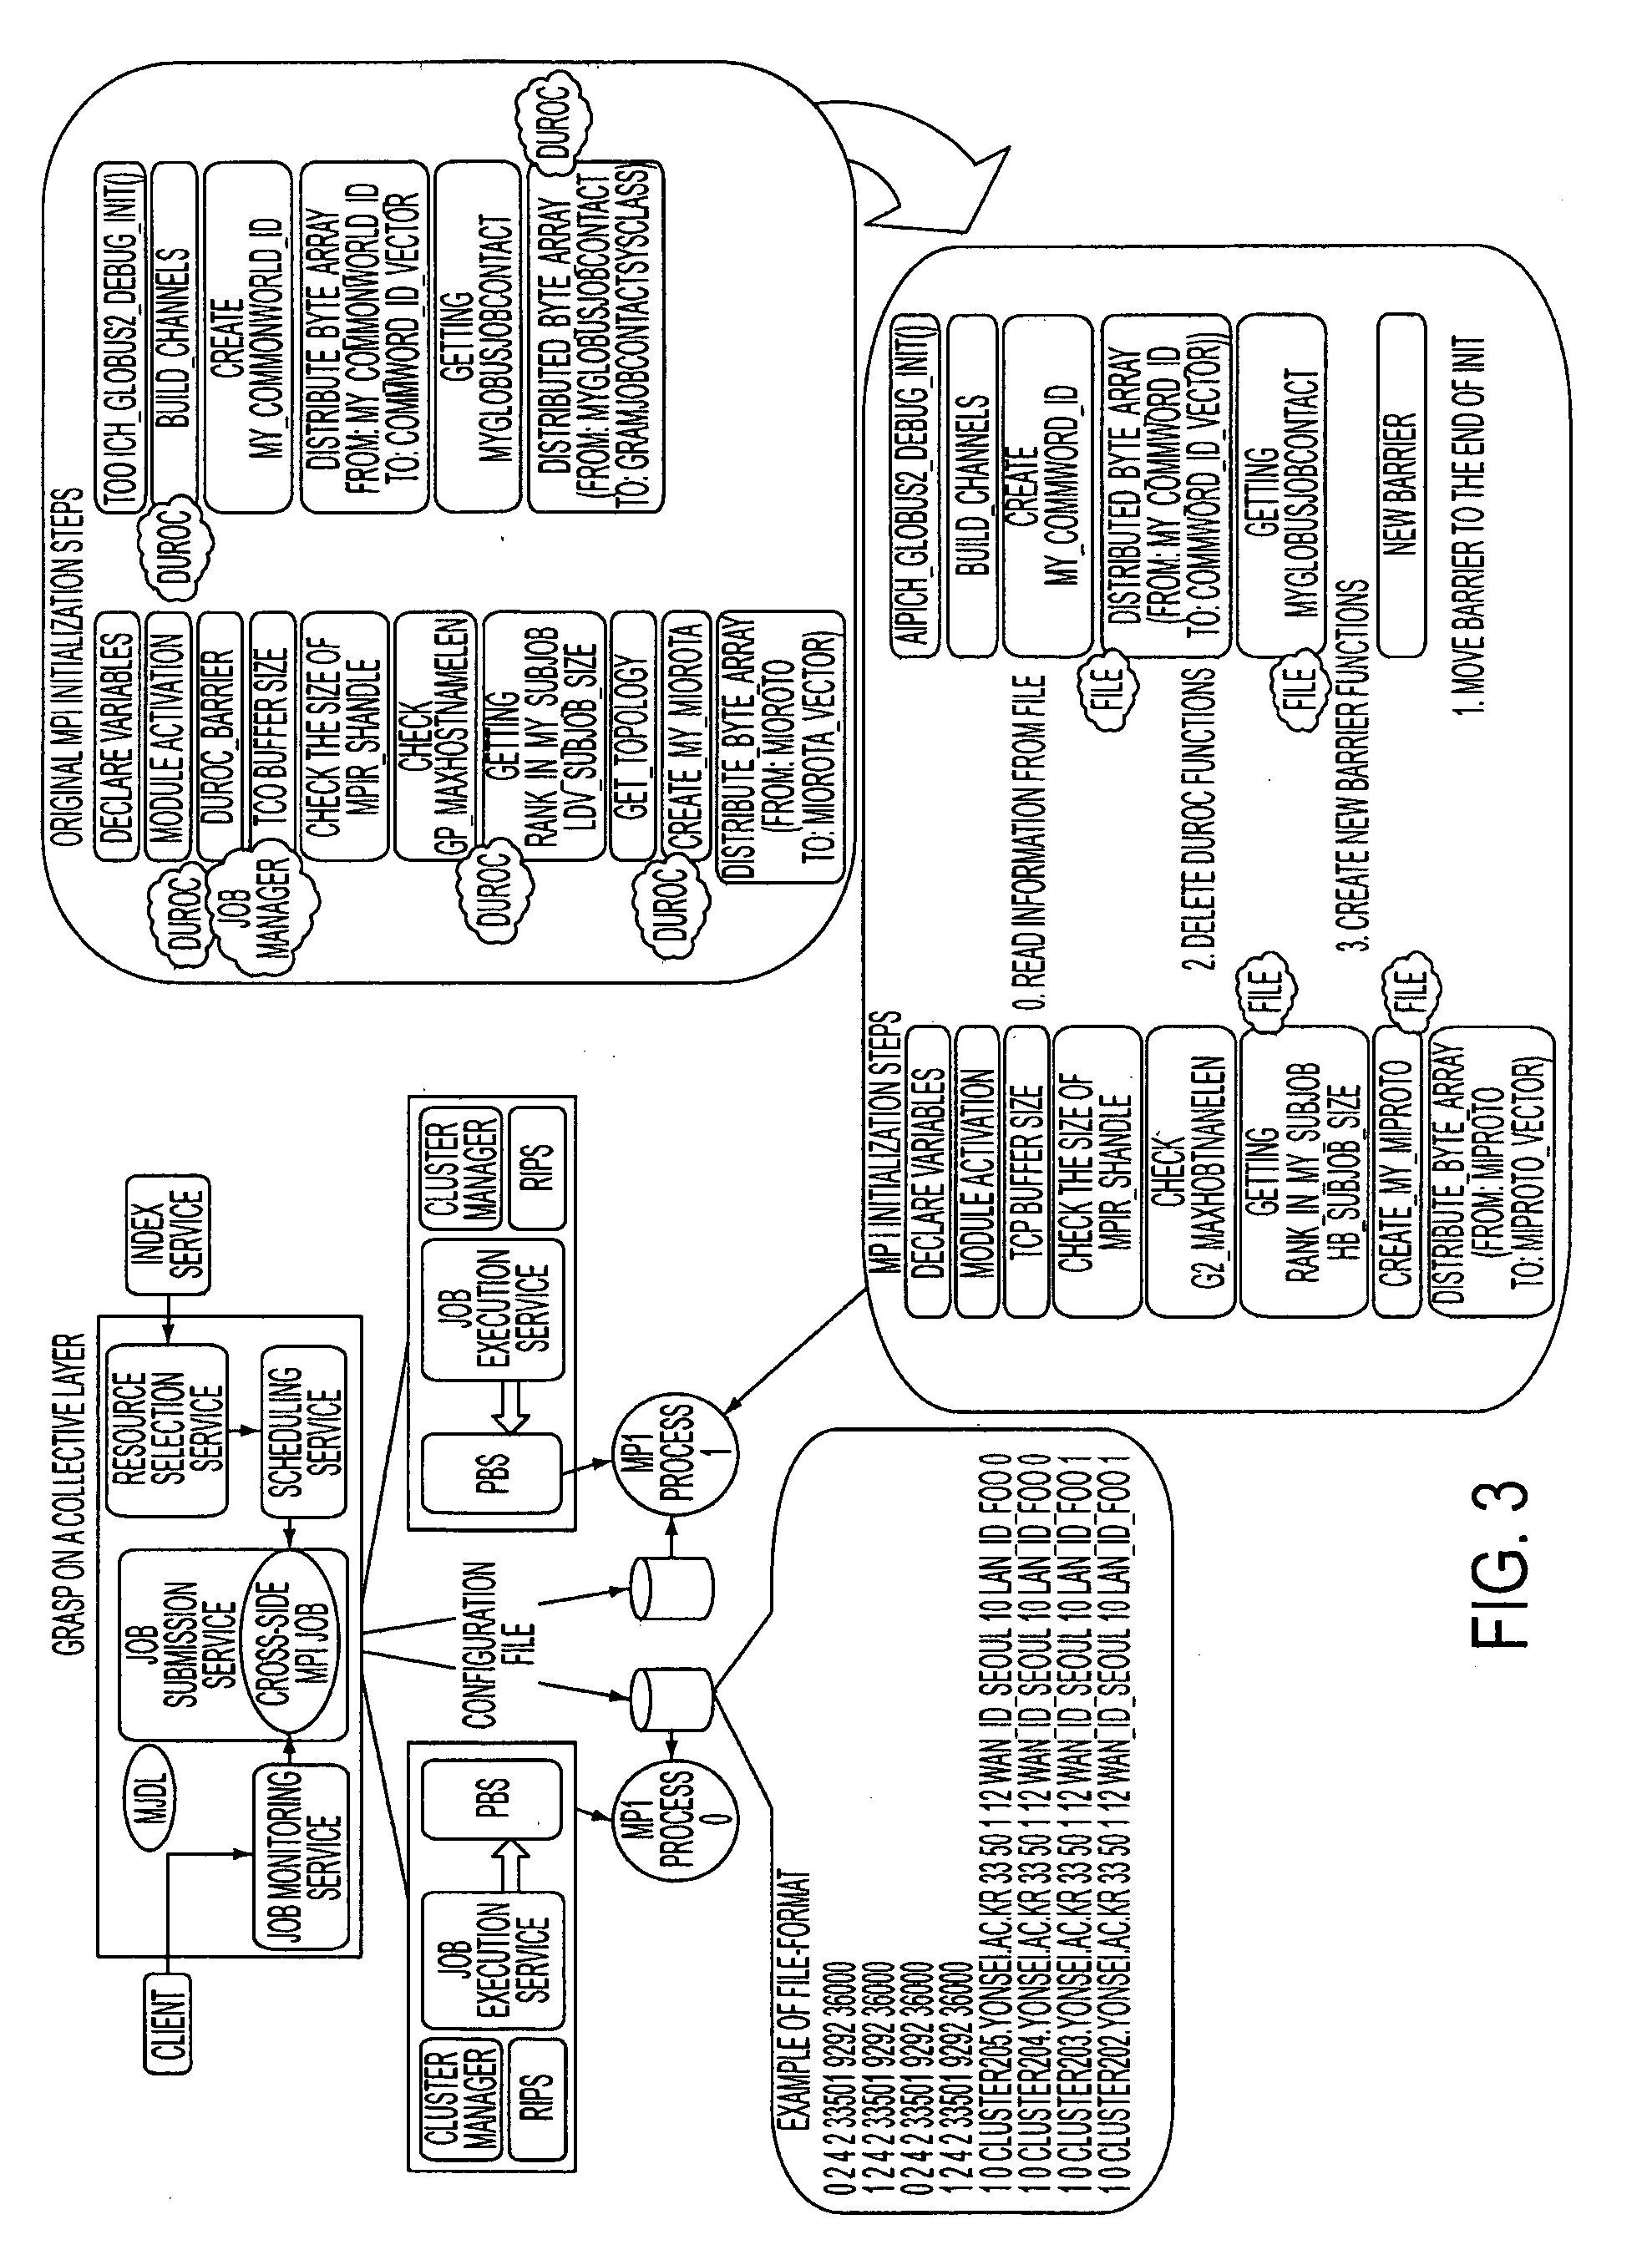 System and method for grid MPI job allocation using file-based MPI initialization in grid computing system